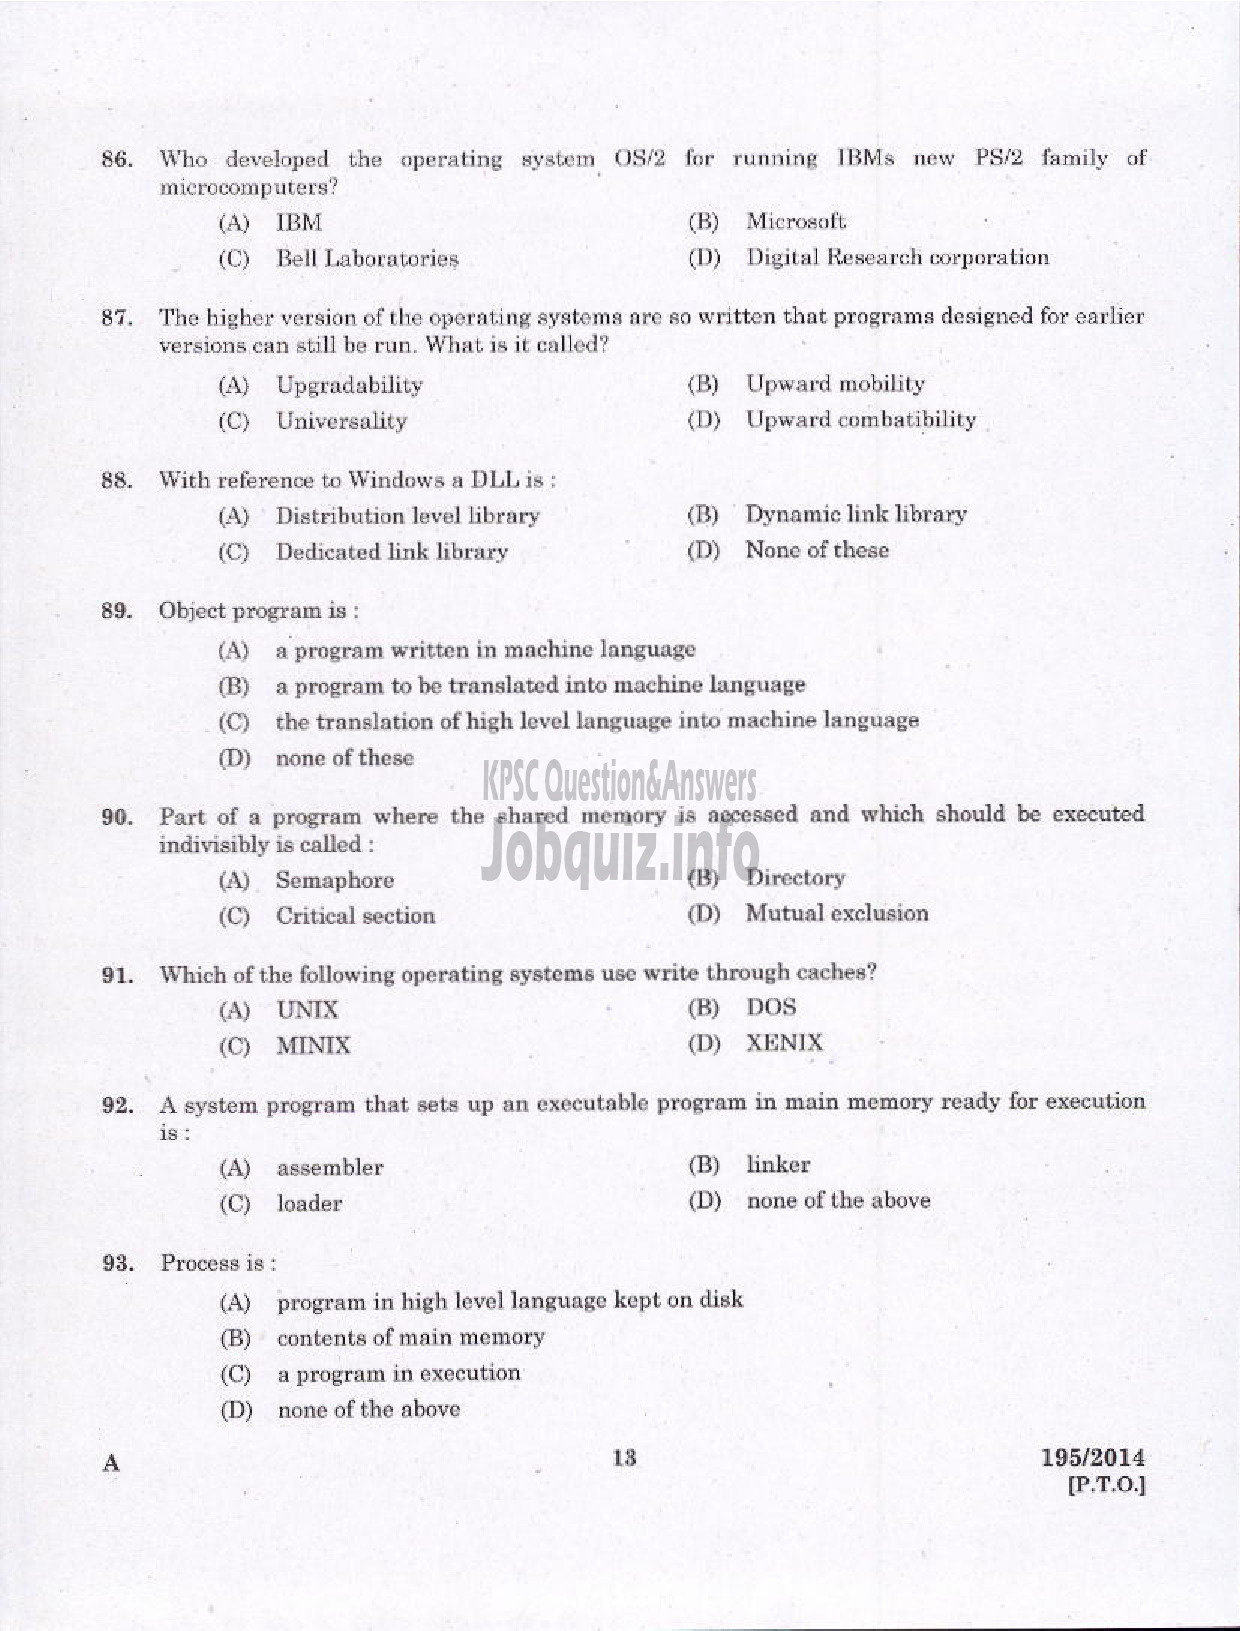 Kerala PSC Question Paper - COMPUTER PROGRAMMER CUM OPERATOR KERALA STATE BEVERAGES / MANUFACTURING AND MARKETING CORPORATION LTD-11